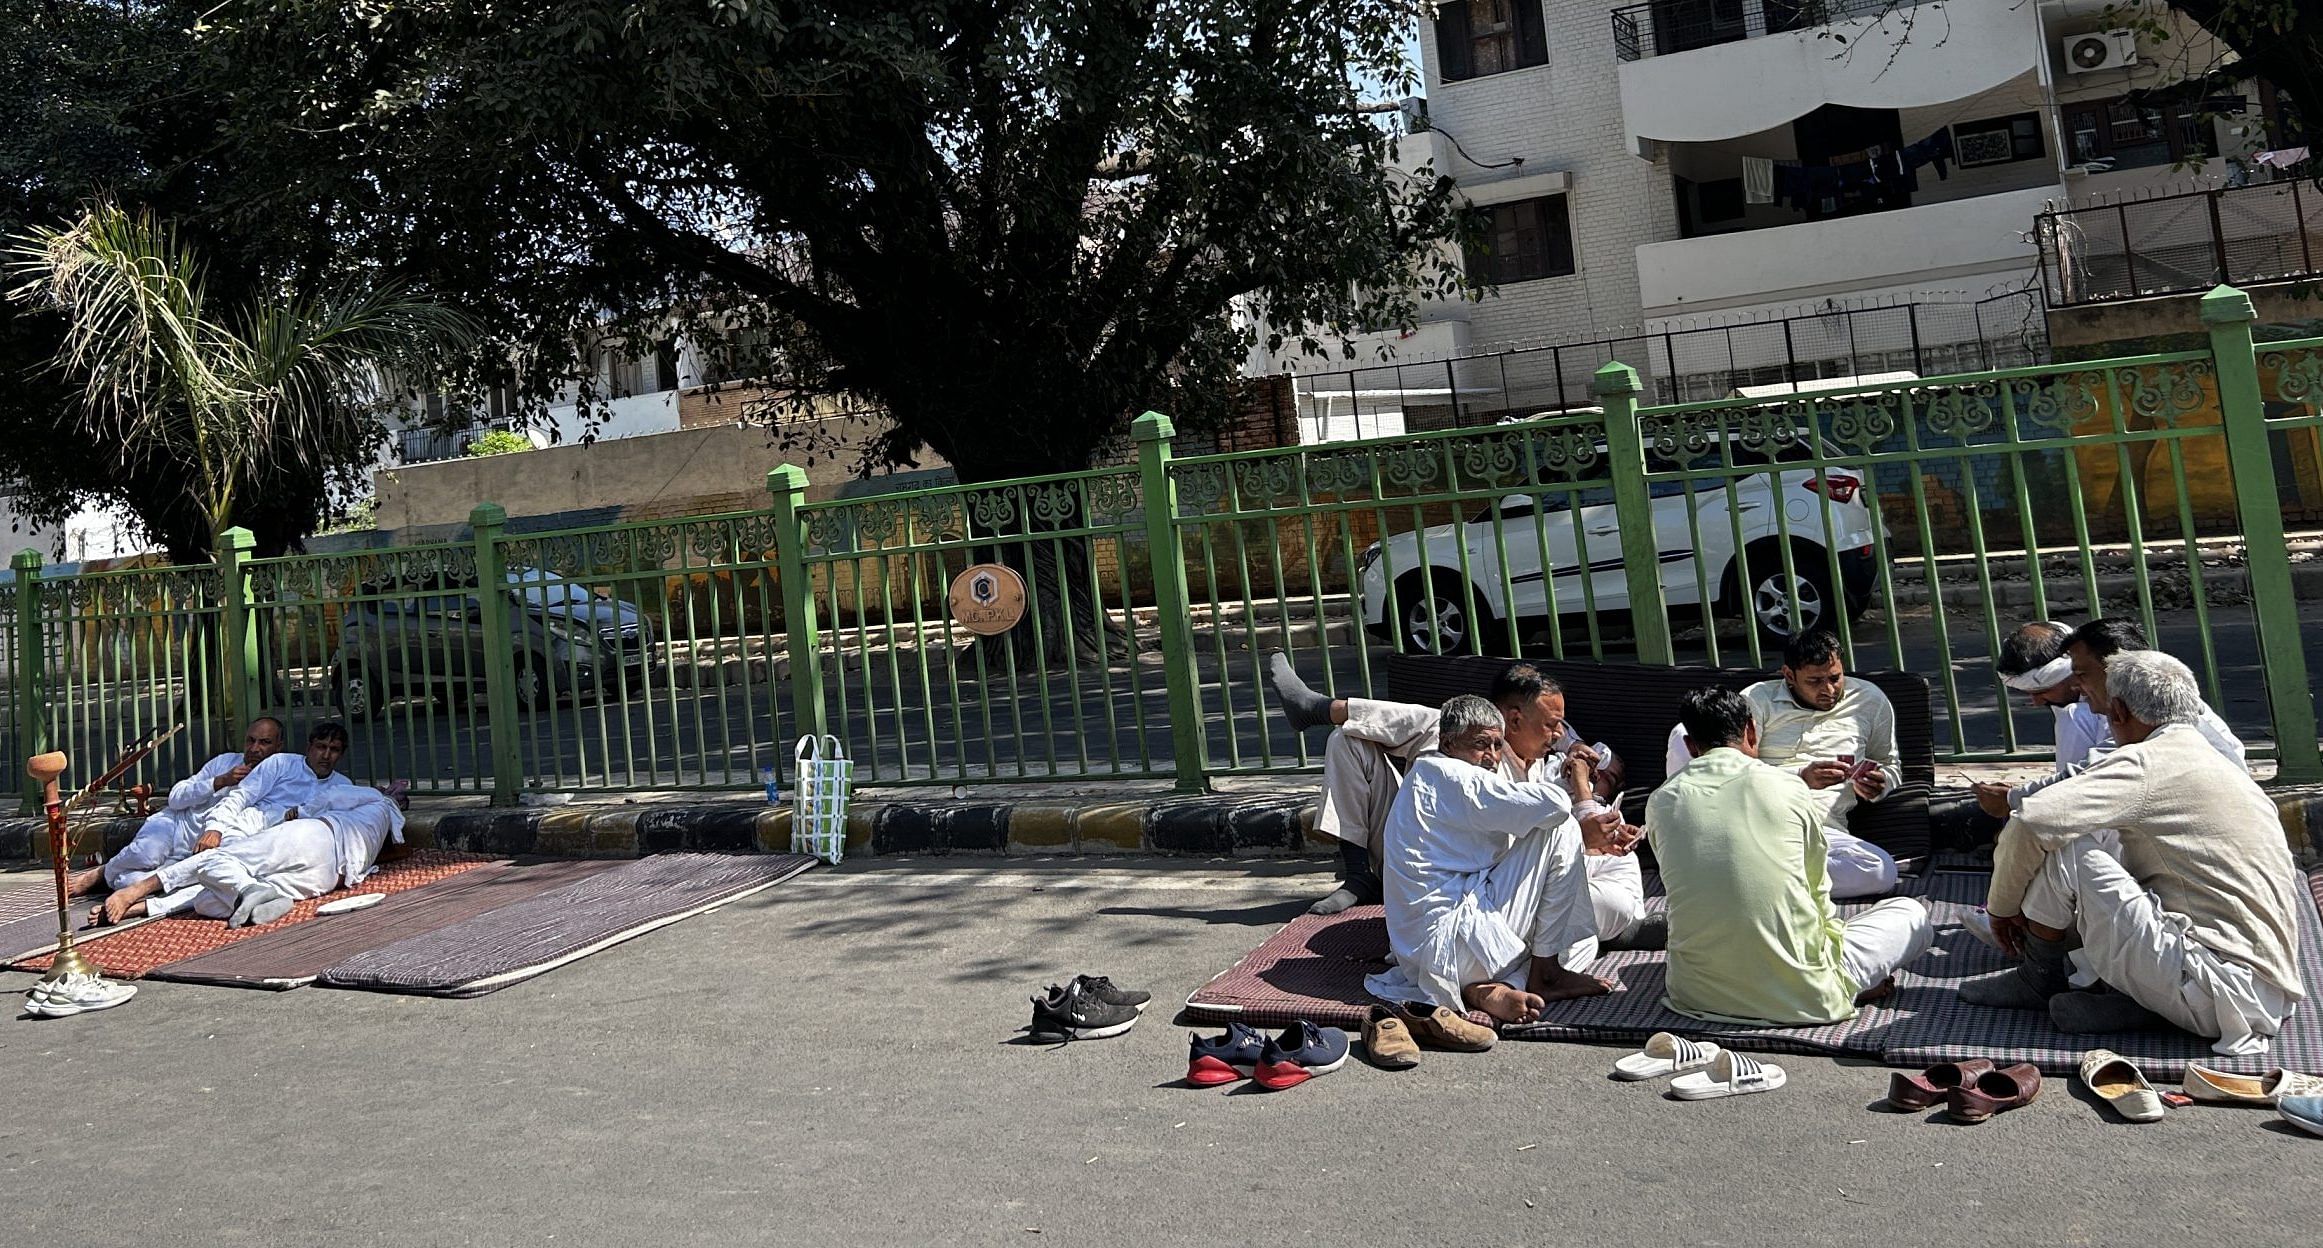 Protestors playing cards and smoking hookah to kill time at the protest site | Jyoti Yadav